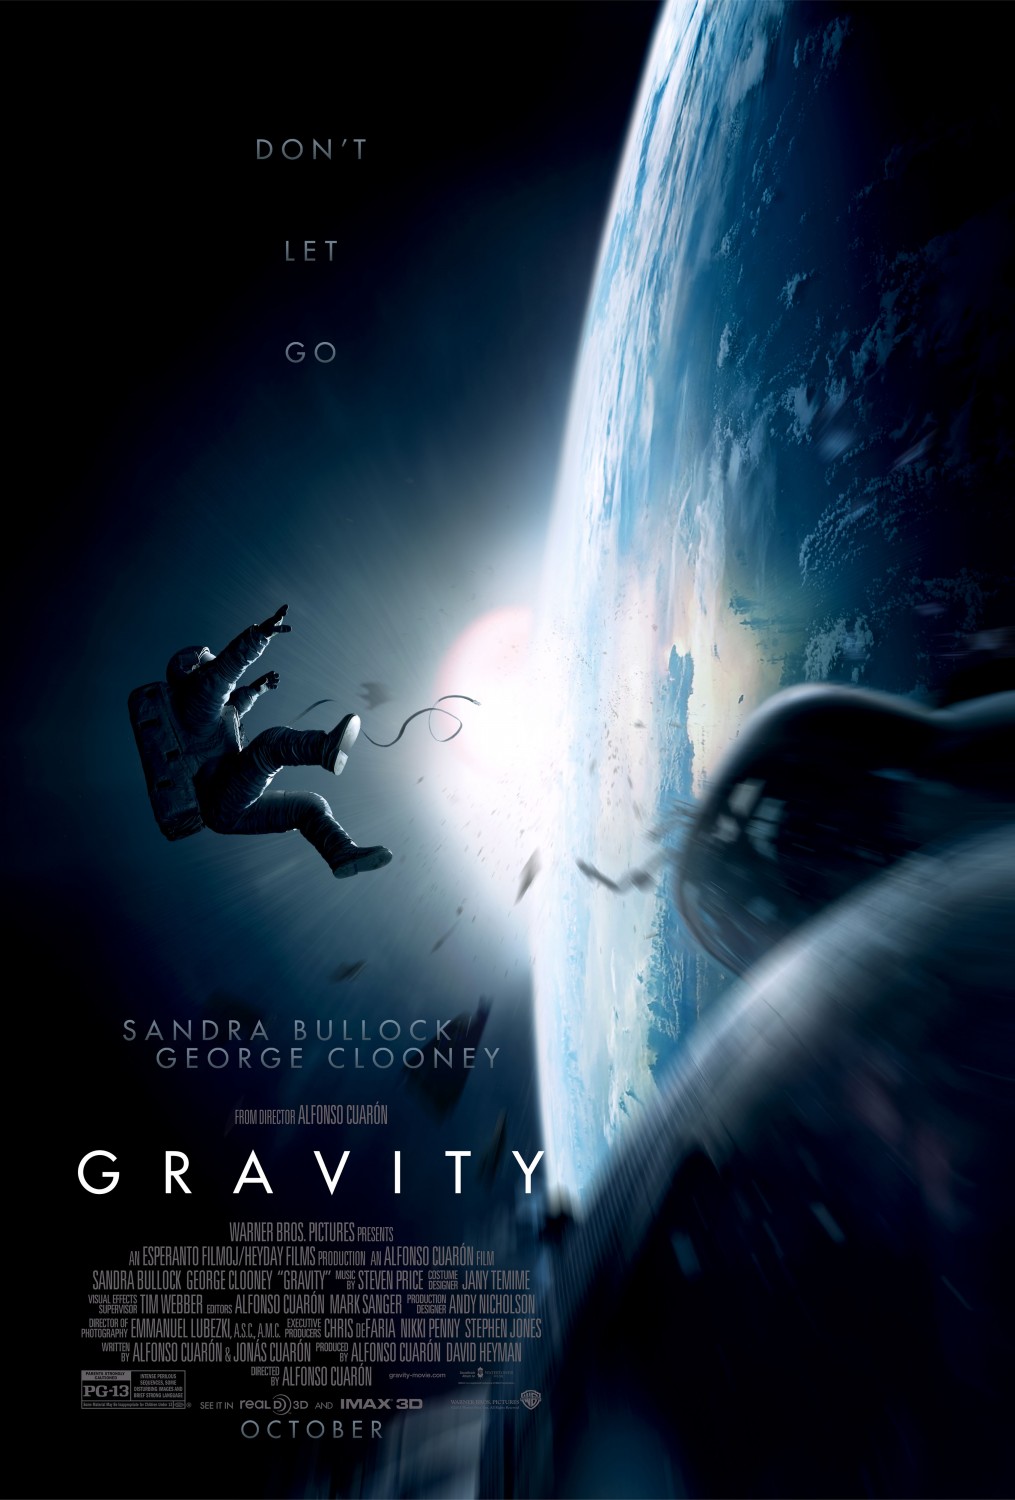 Poster for the 2013 movie about space debris called 'Gravity'